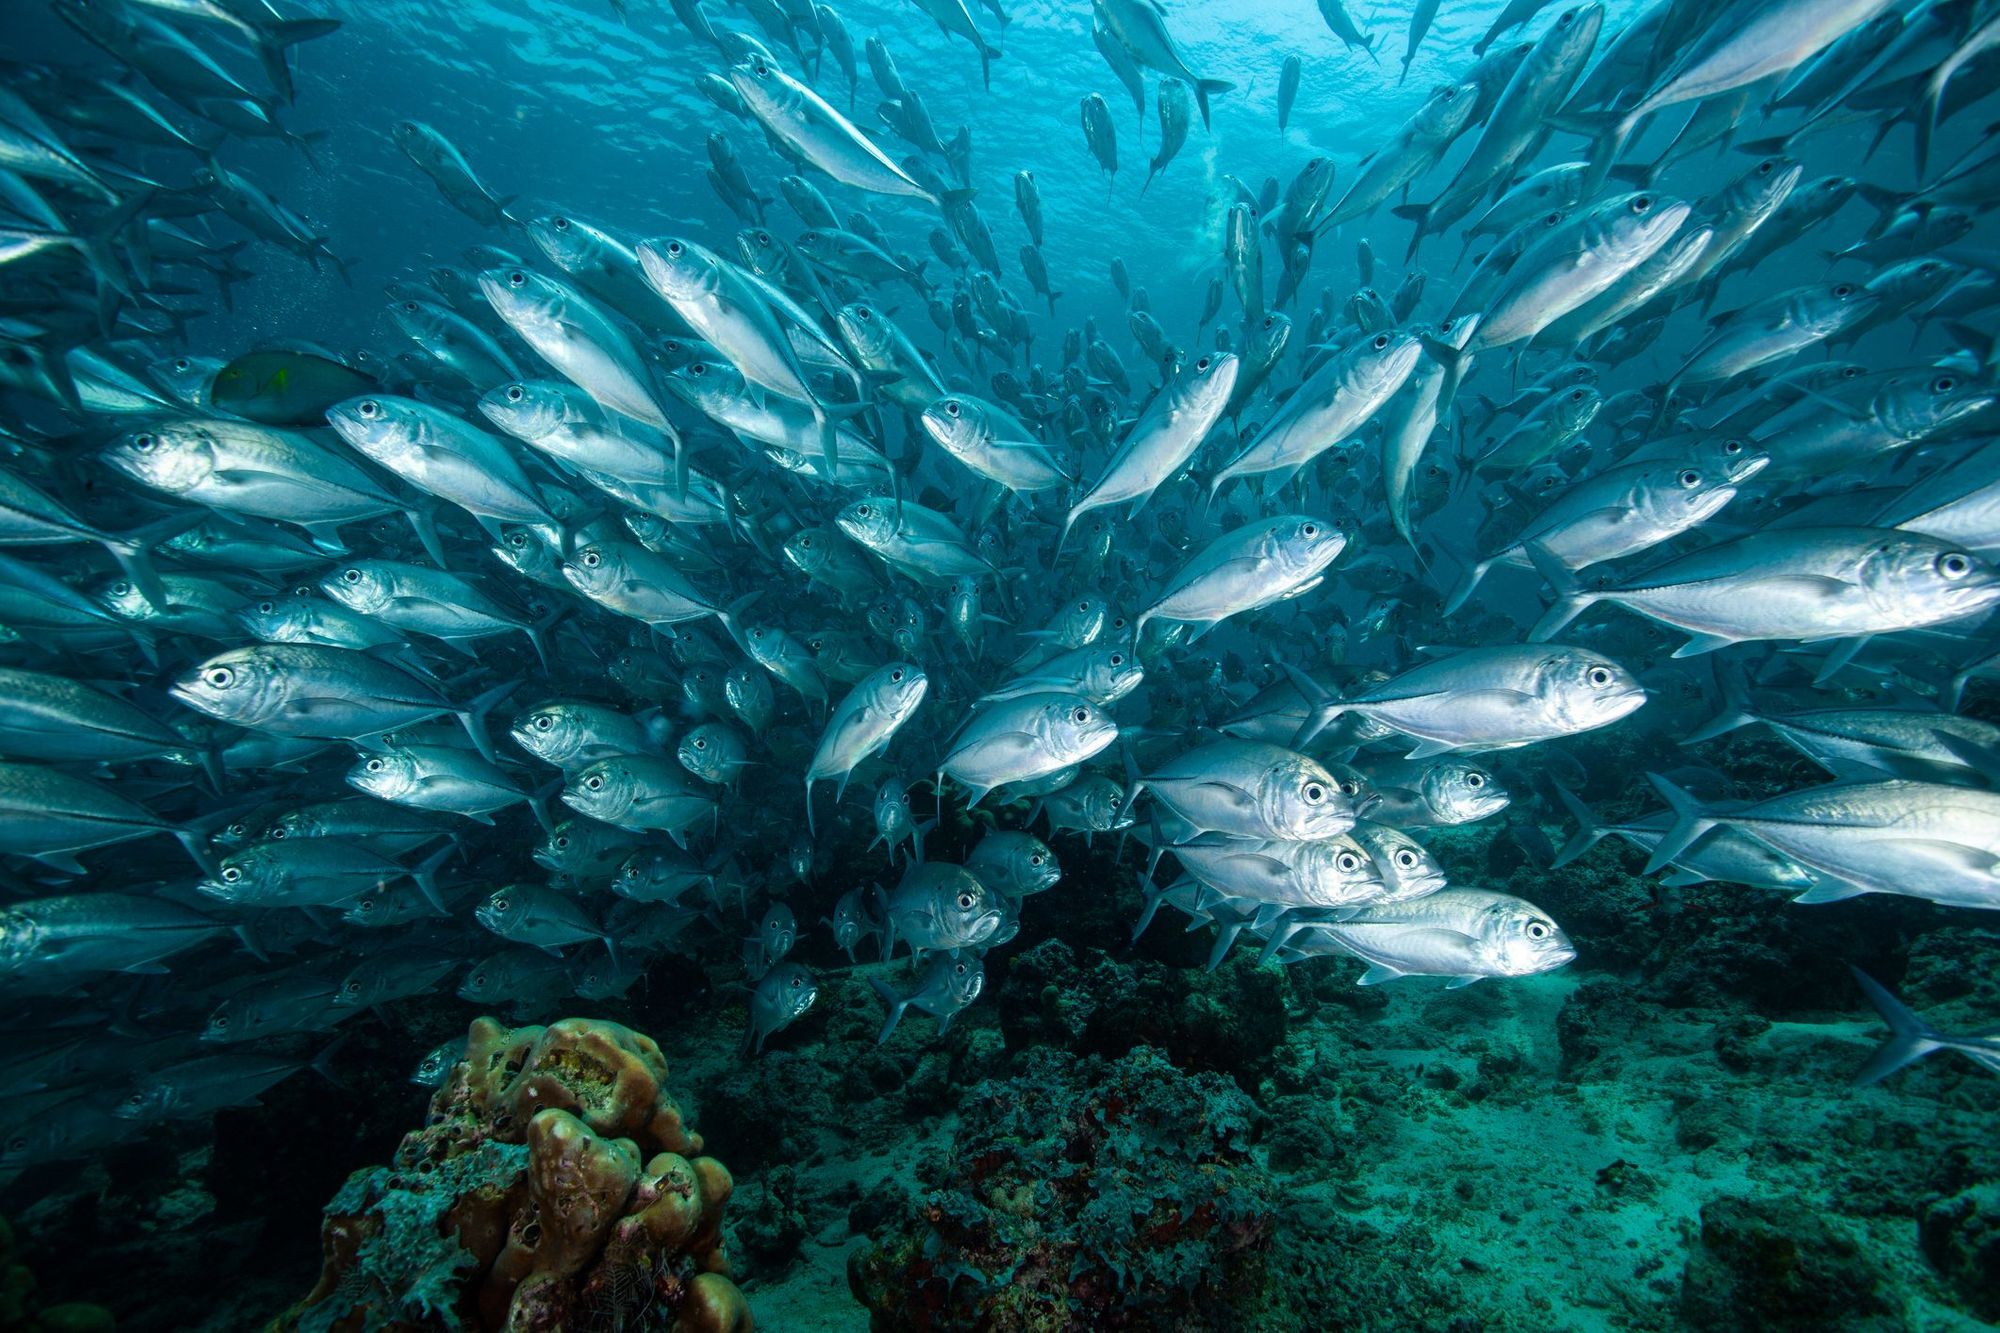 A shoal of fish under the sea, including barracudas and snappers.